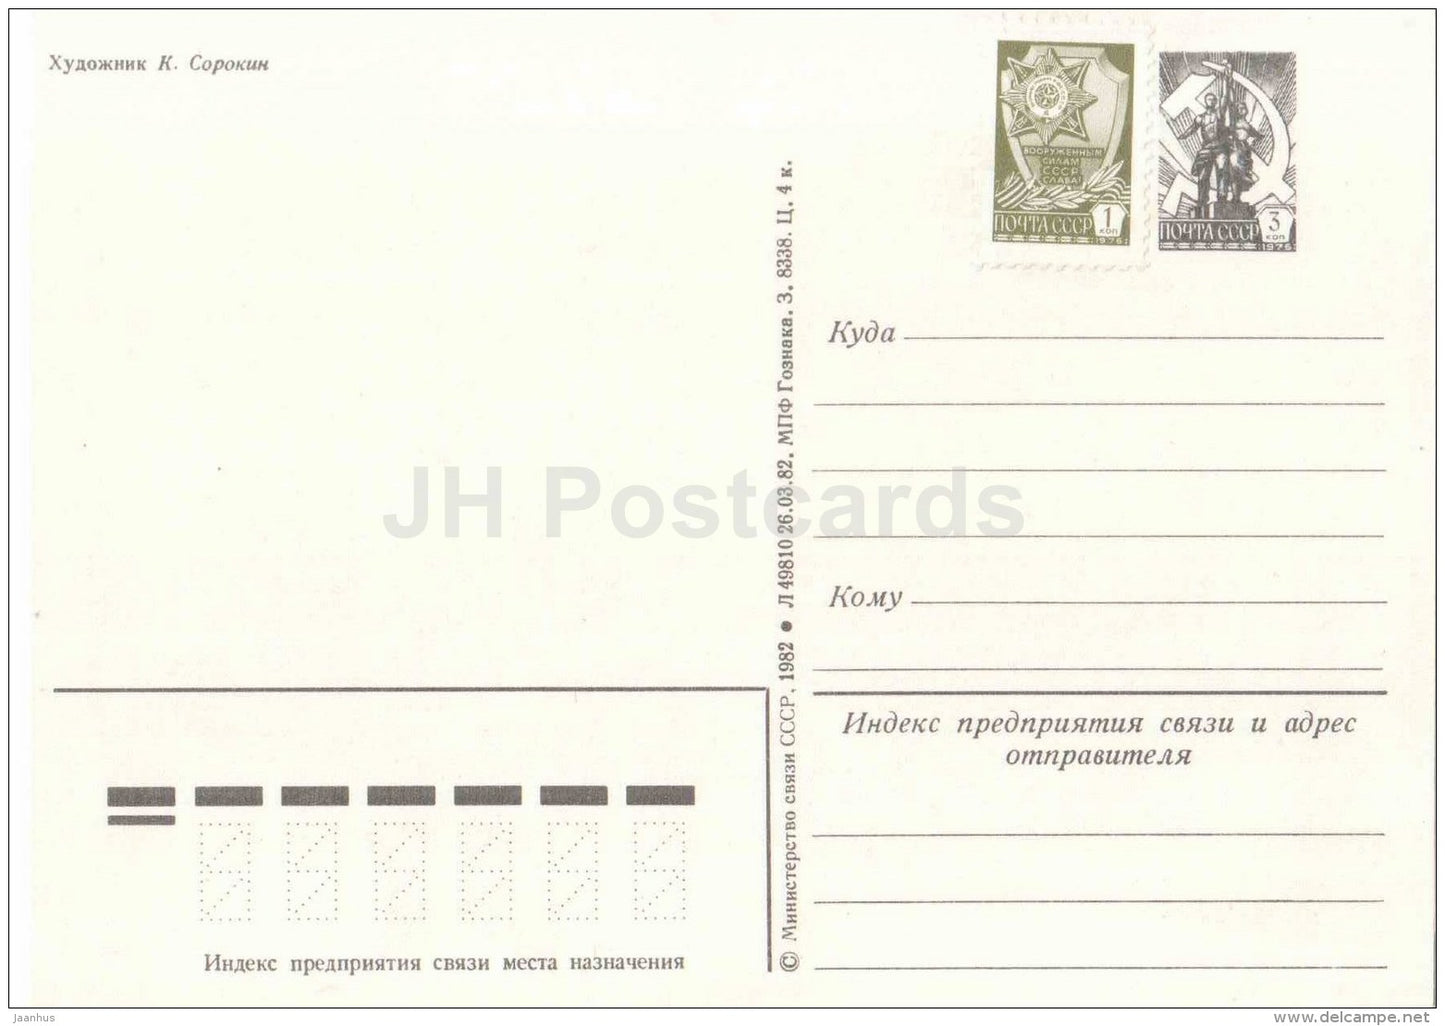 Victory Day anniversary by K. Sorokin - Order of the Great Patriotic War - AVIA - 1982 - Russia USSR - unused - JH Postcards